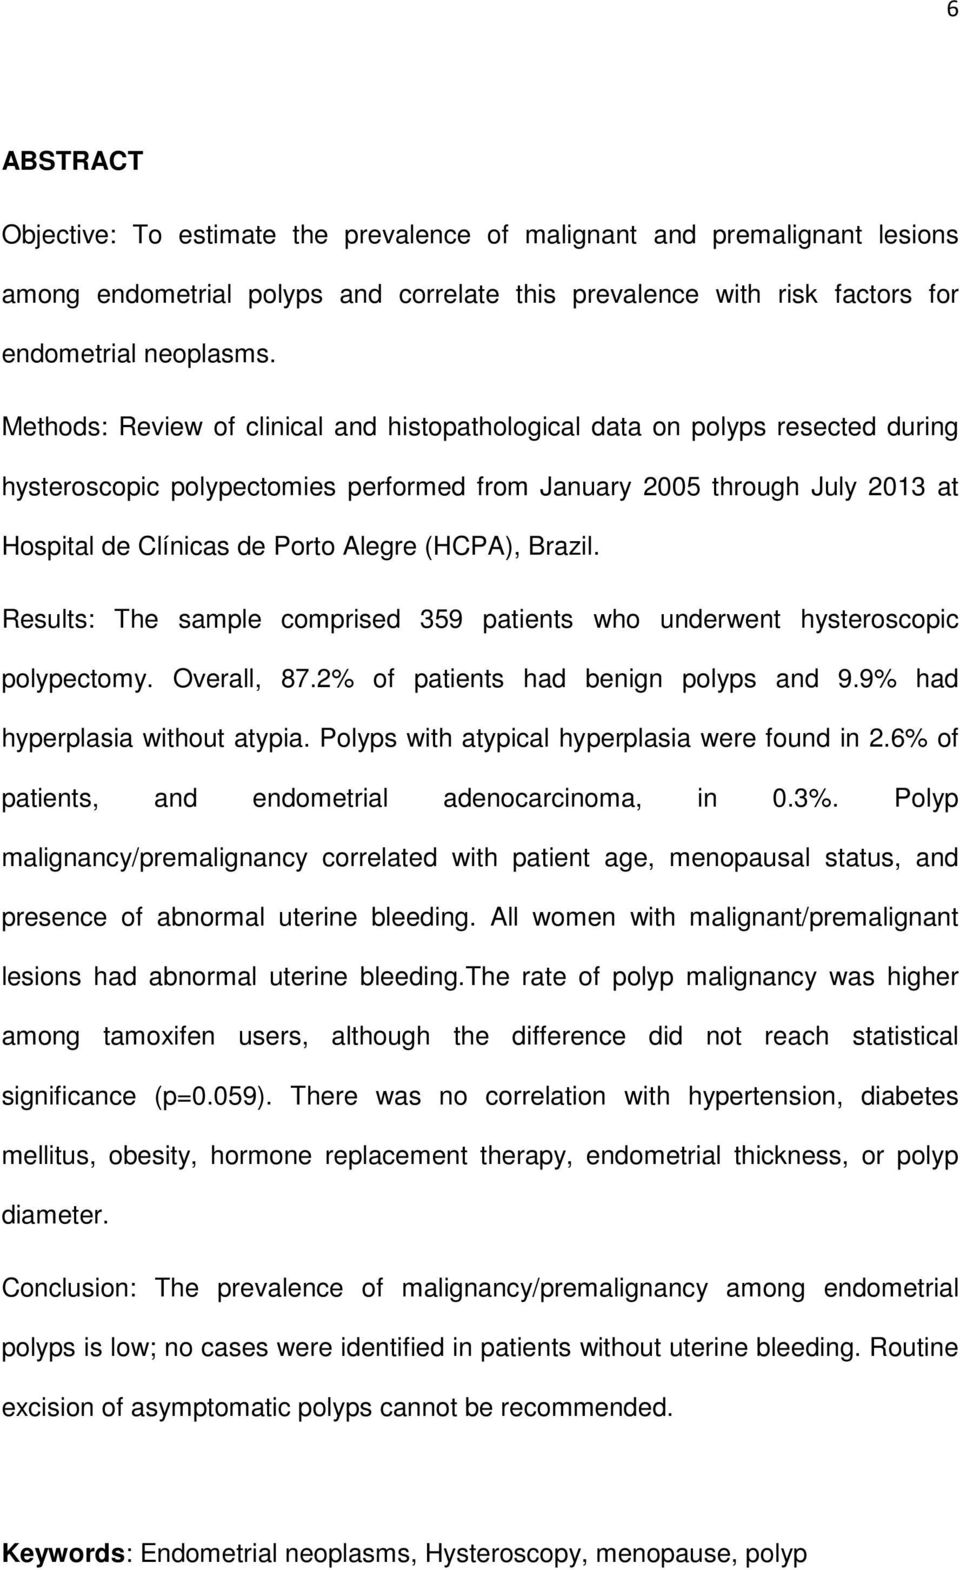 (HCPA), Brazil. Results: The sample comprised 359 patients who underwent hysteroscopic polypectomy. Overall, 87.2% of patients had benign polyps and 9.9% had hyperplasia without atypia.